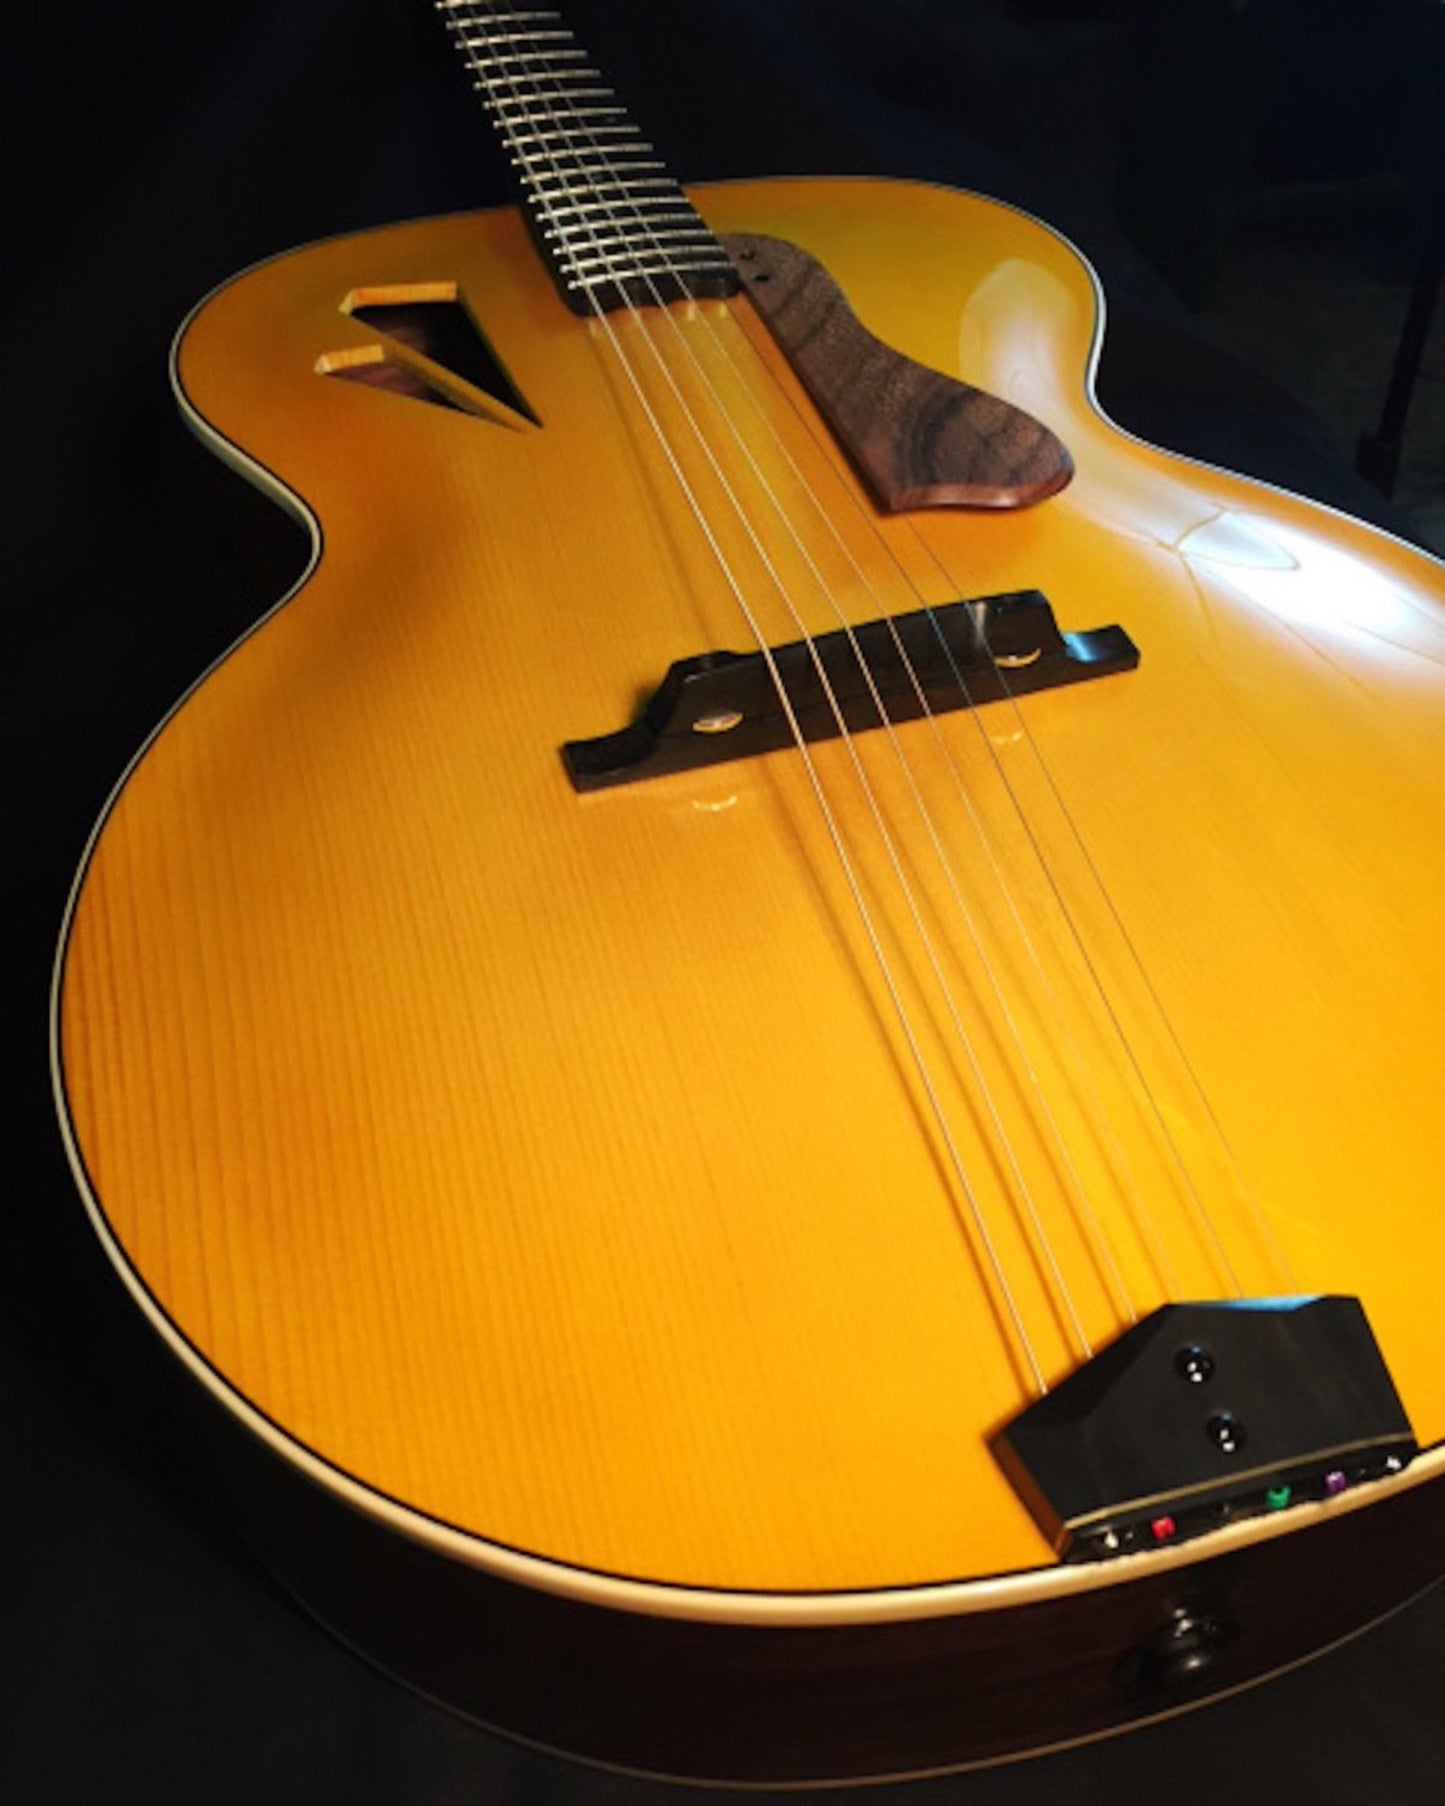 THE LEMURIAN ARCHTOP